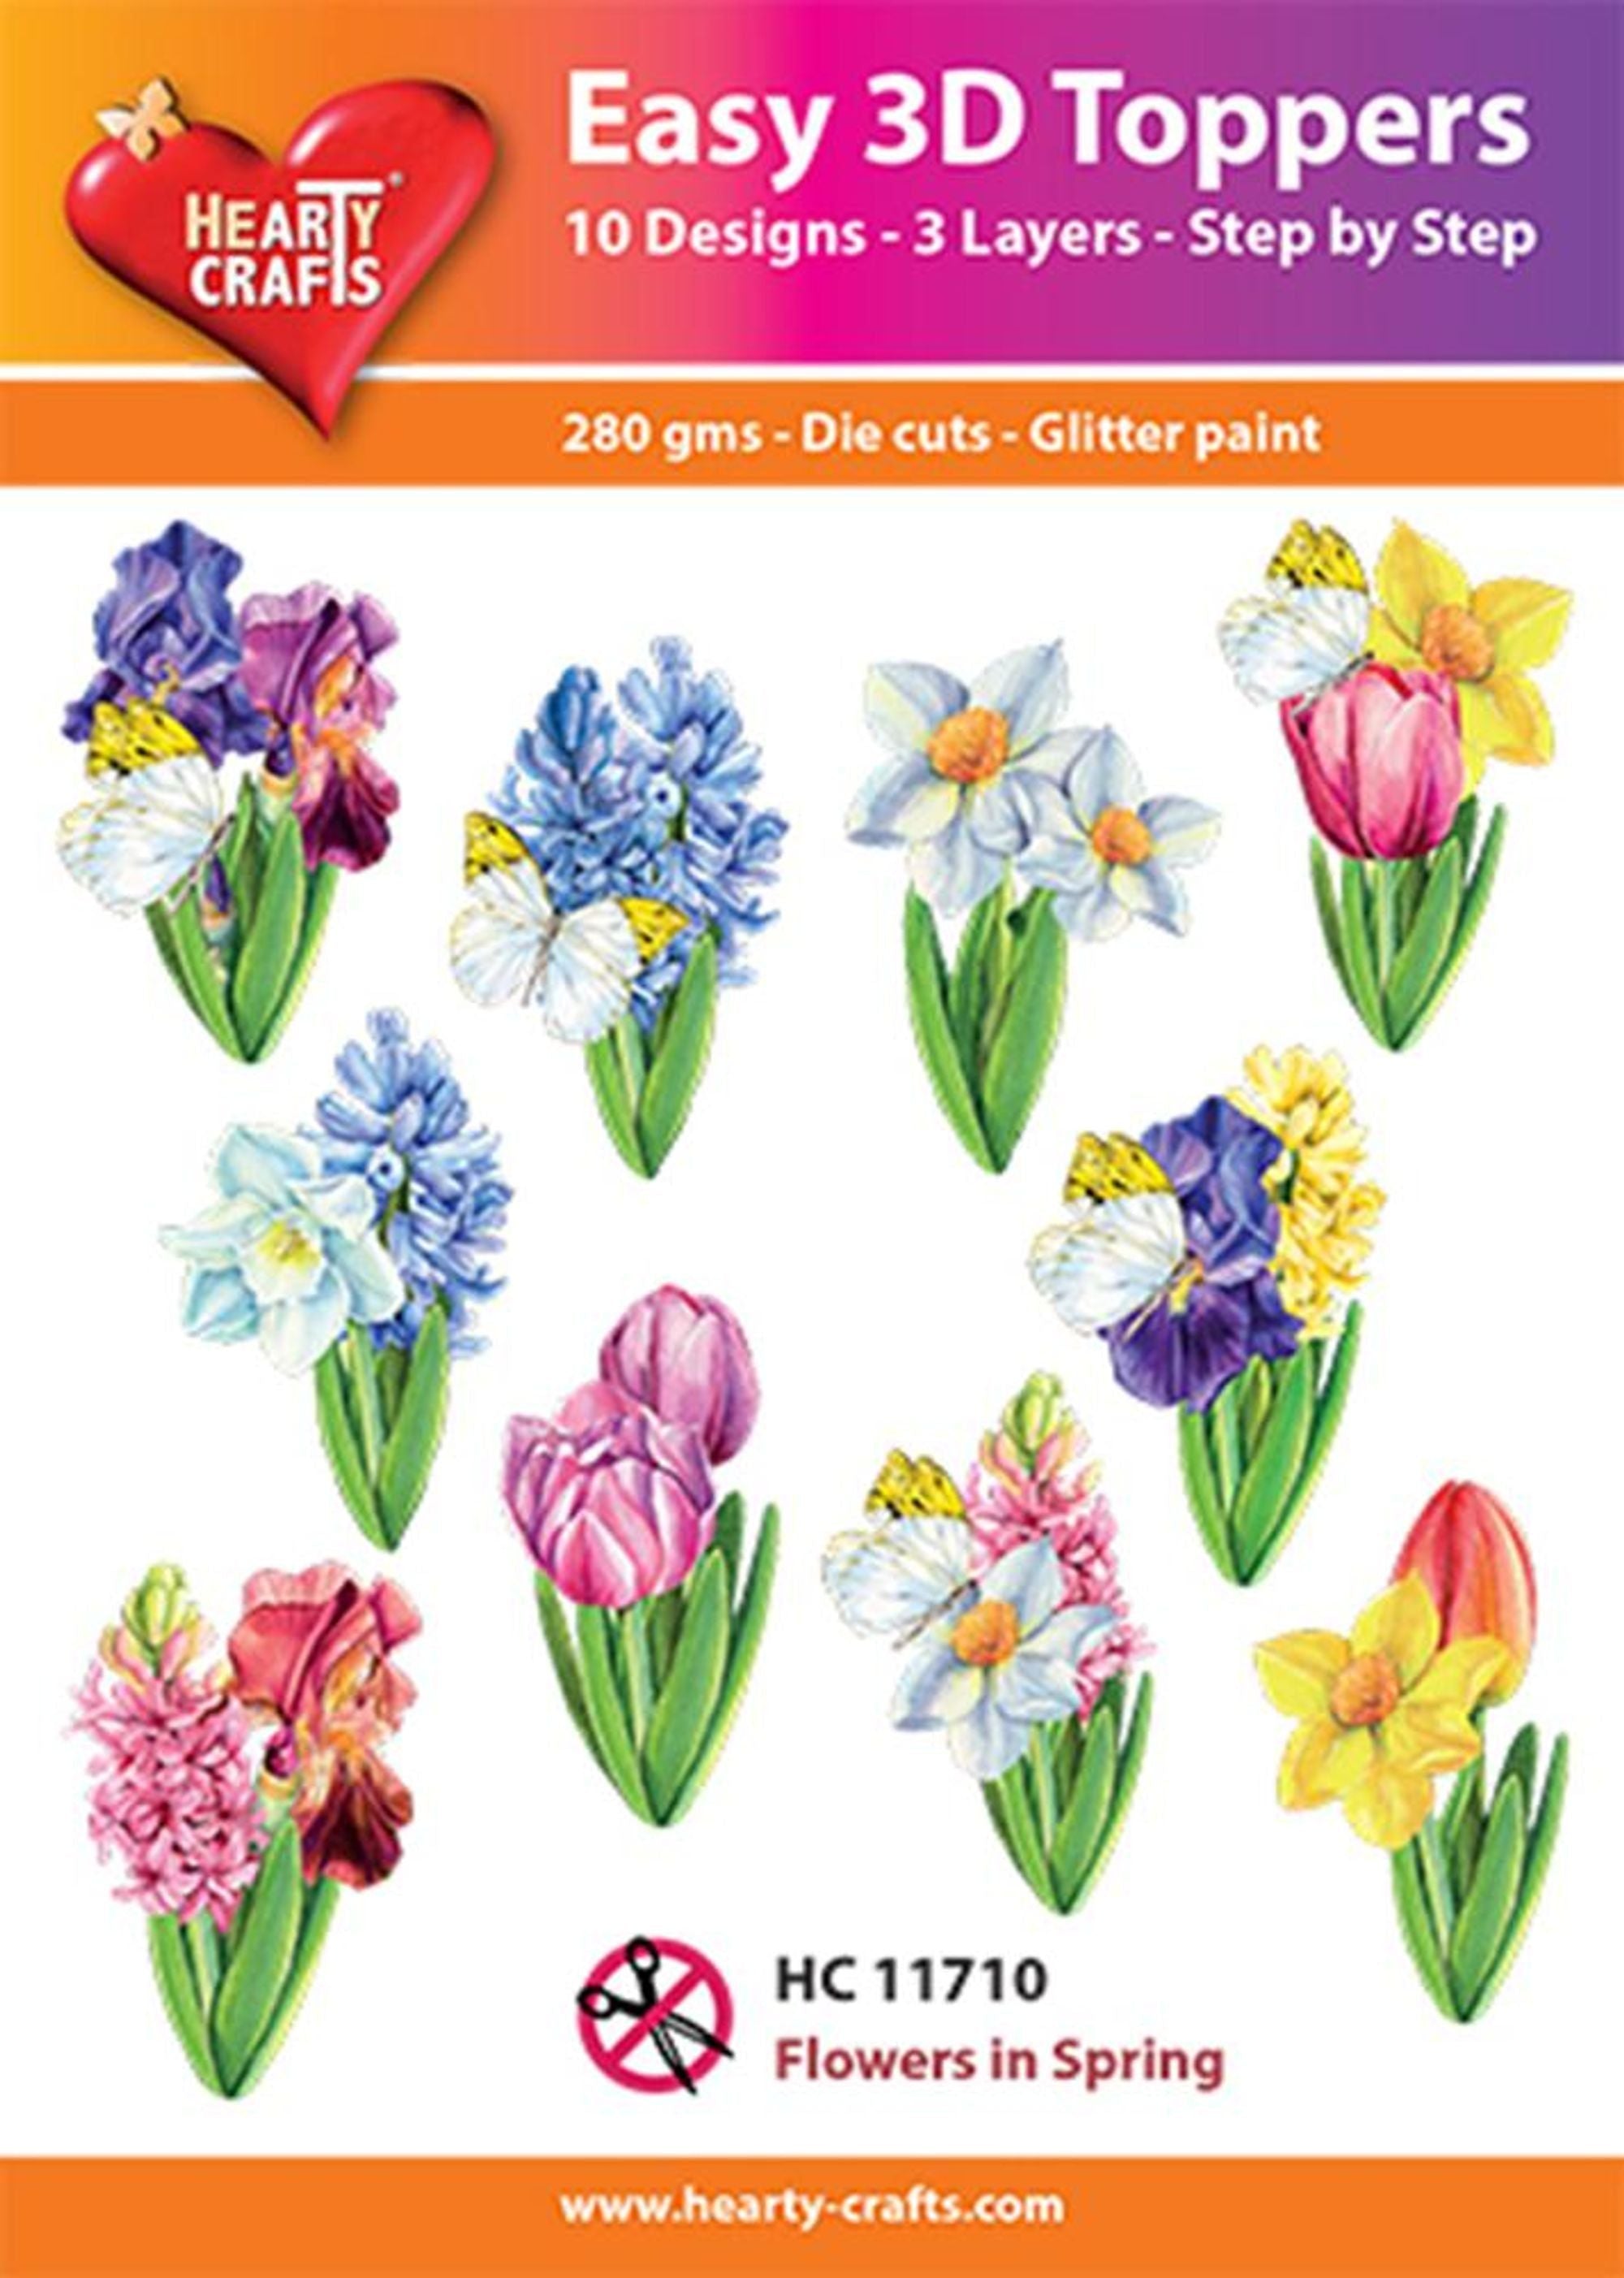 Hearty Crafts Easy 3D Toppers - Flowers in Spring